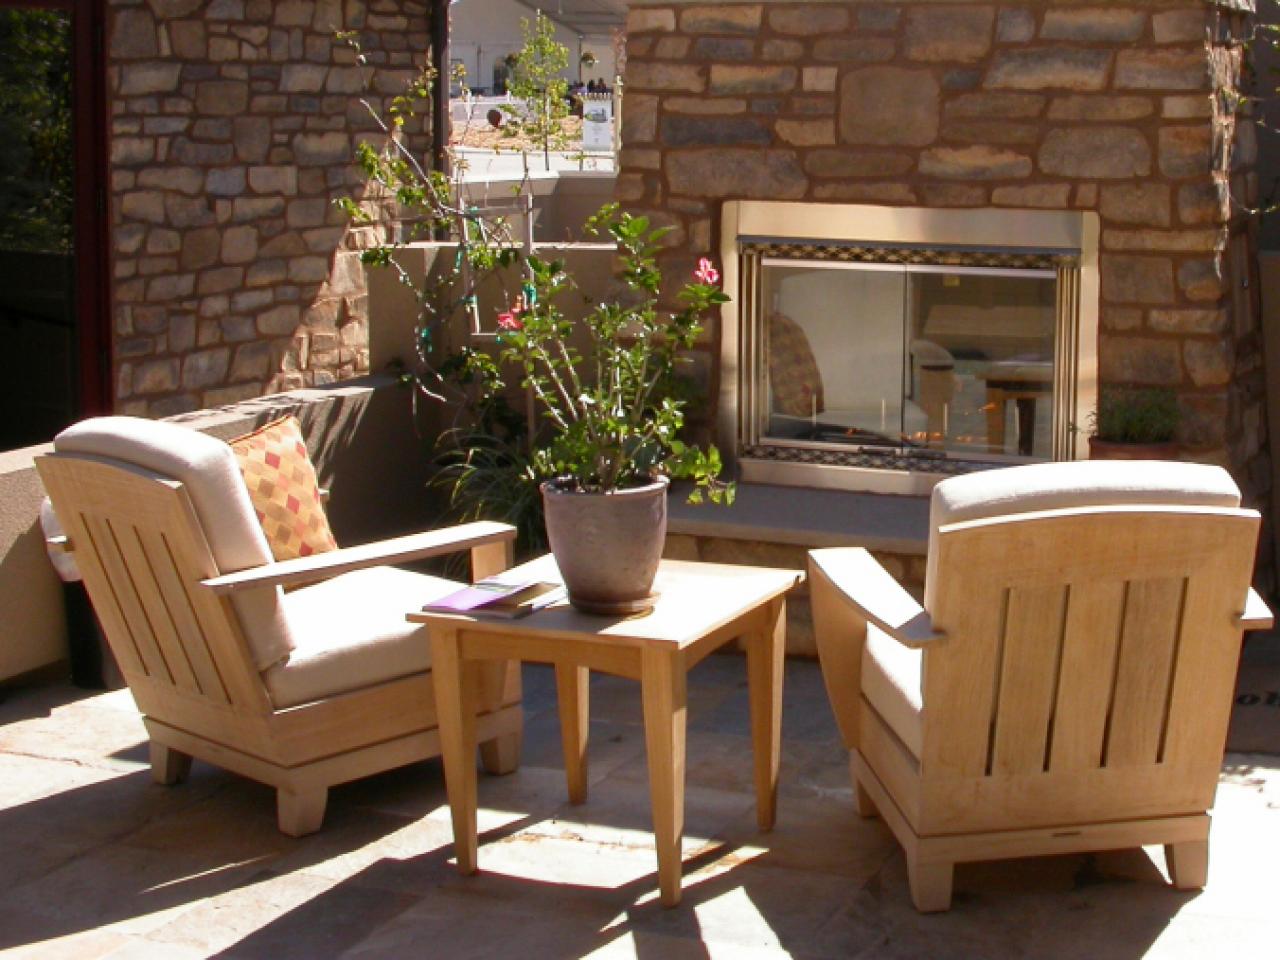 Outdoor stone fireplace in the sunlight